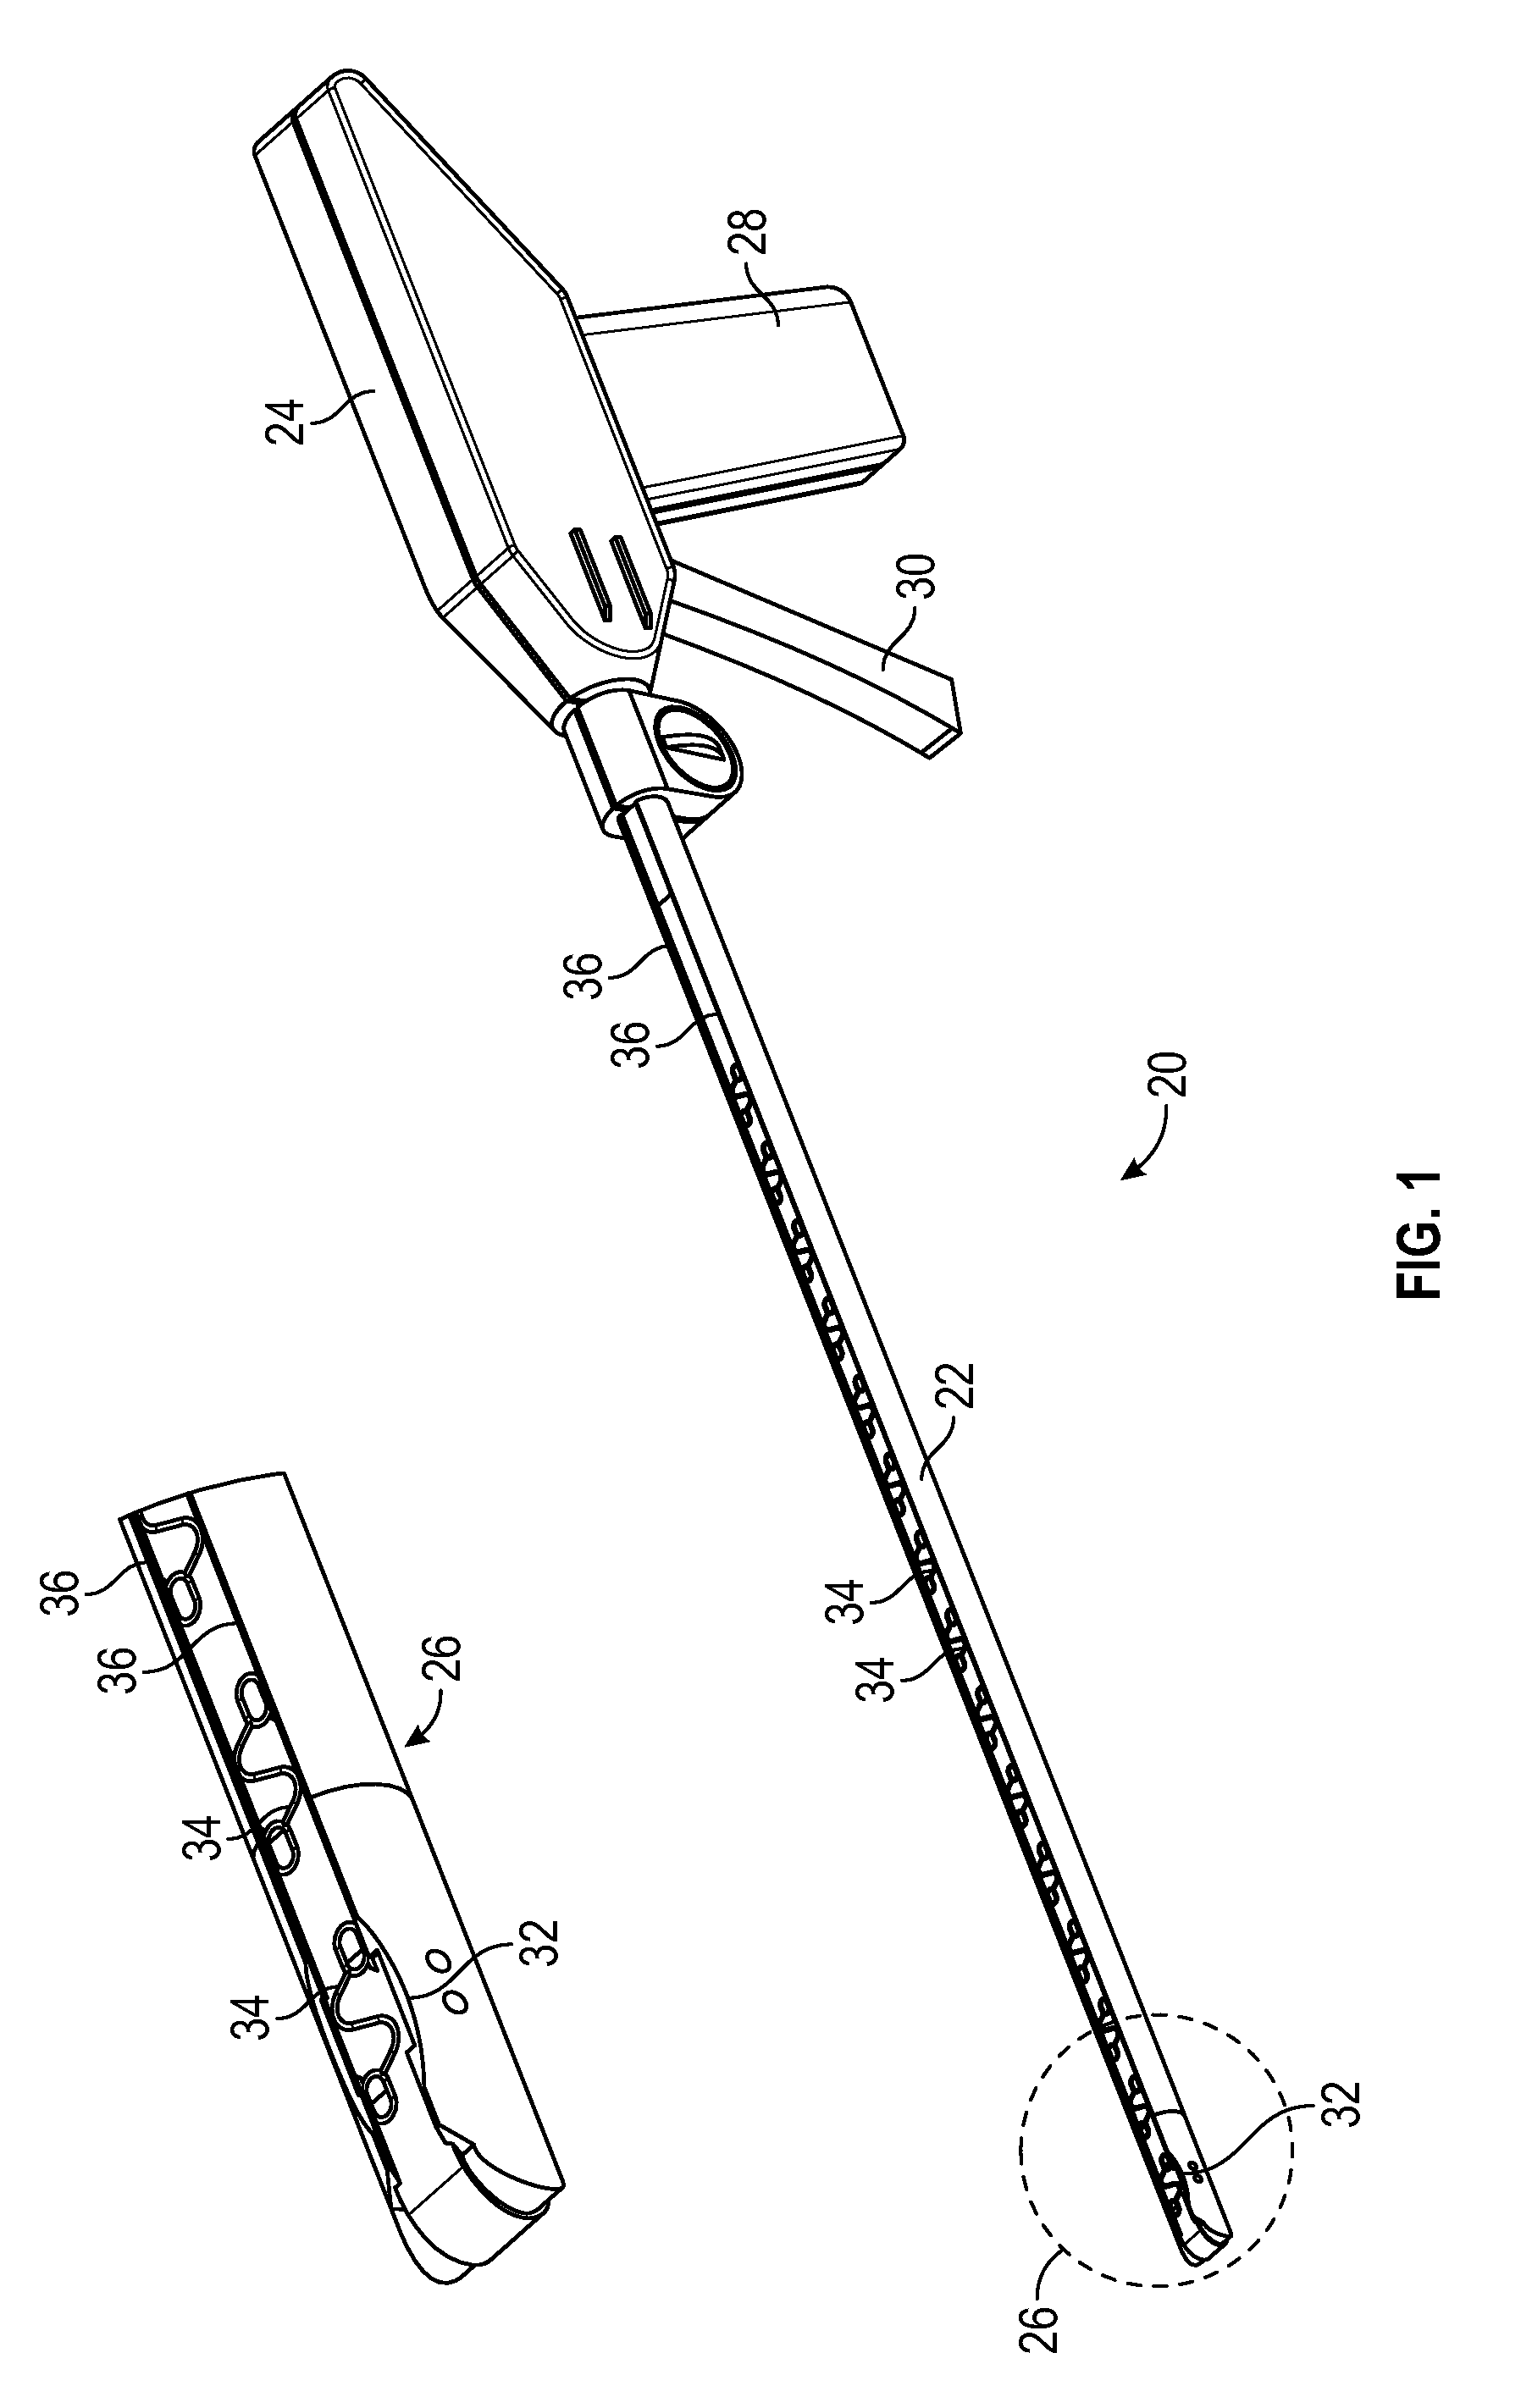 Medical fastening device